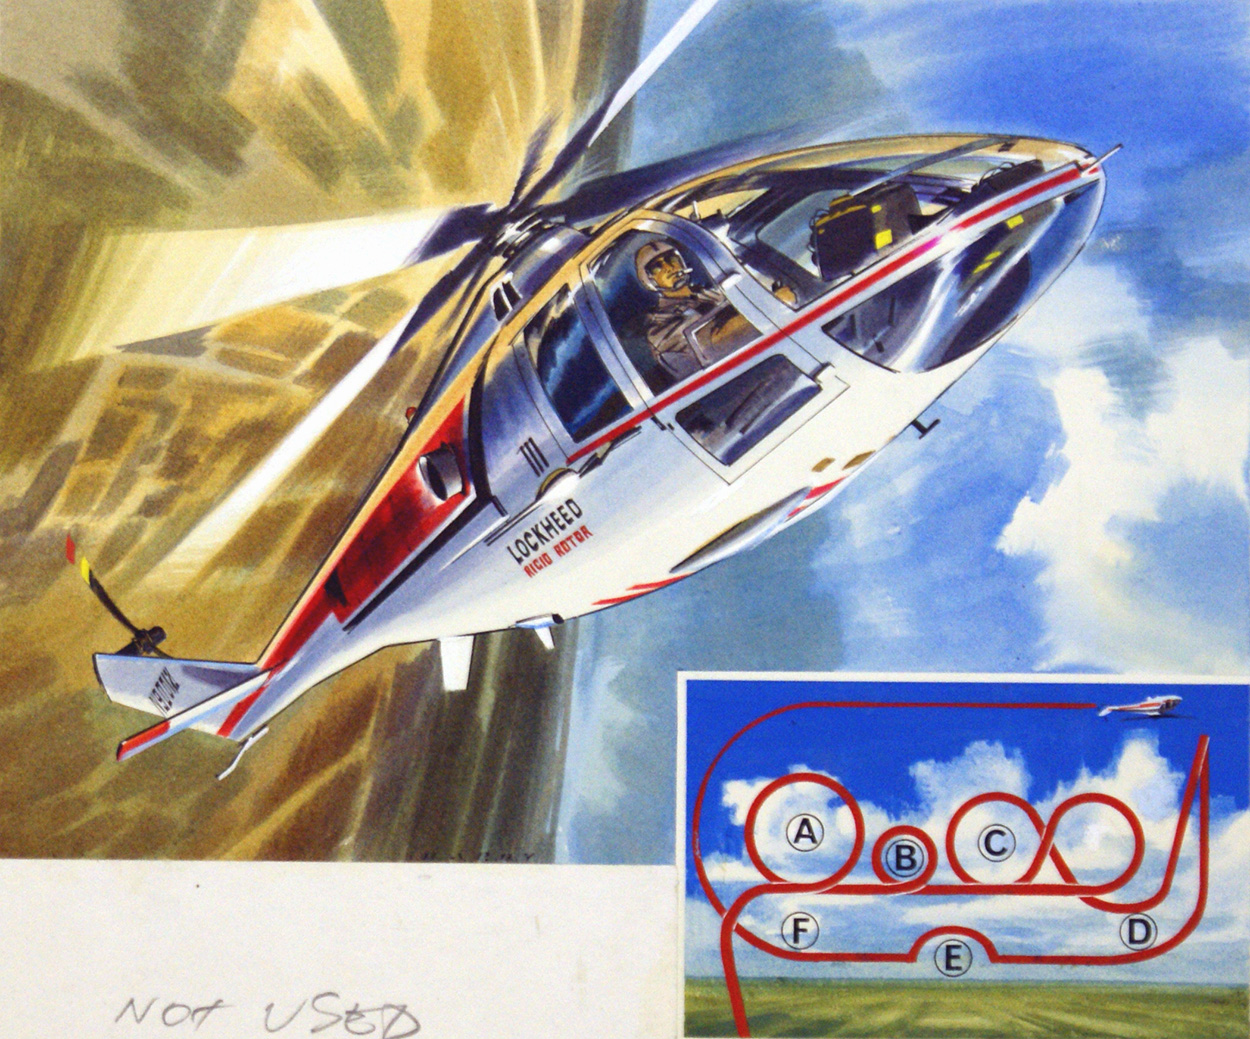 The Aerobatic Helicopter (Original) art by Air (Wilf Hardy) at The Illustration Art Gallery